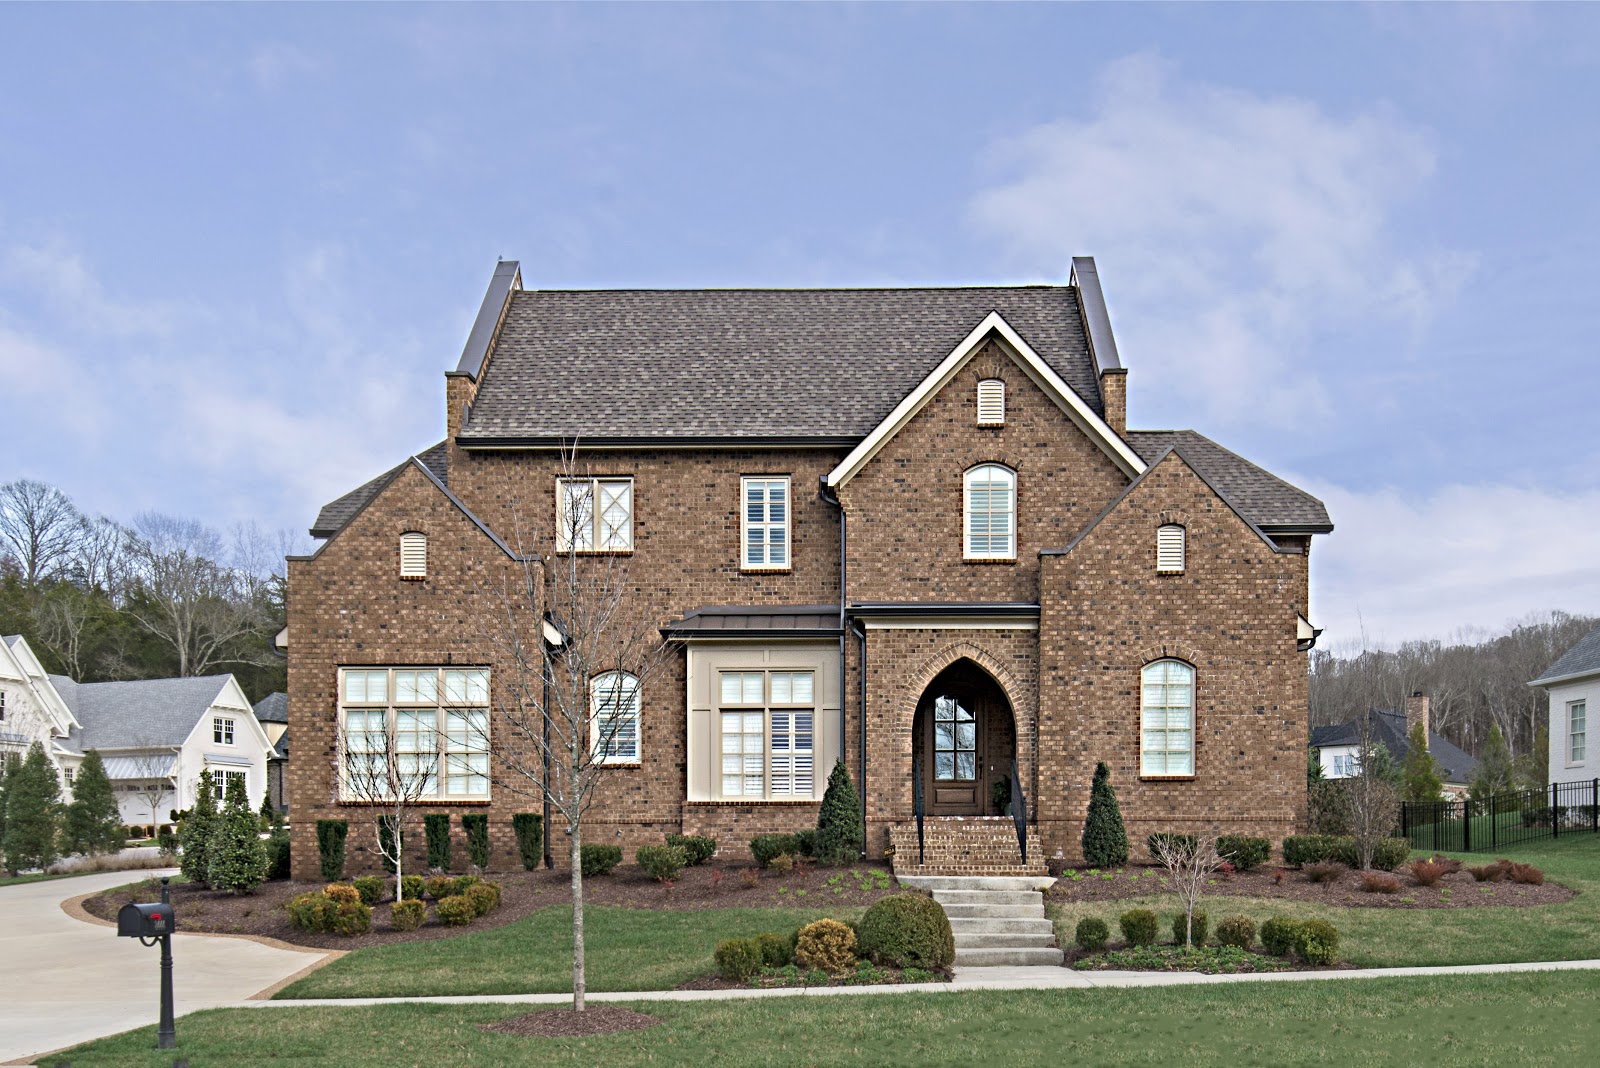 Large, brick home in Middle Tennessee with grey shingle roof